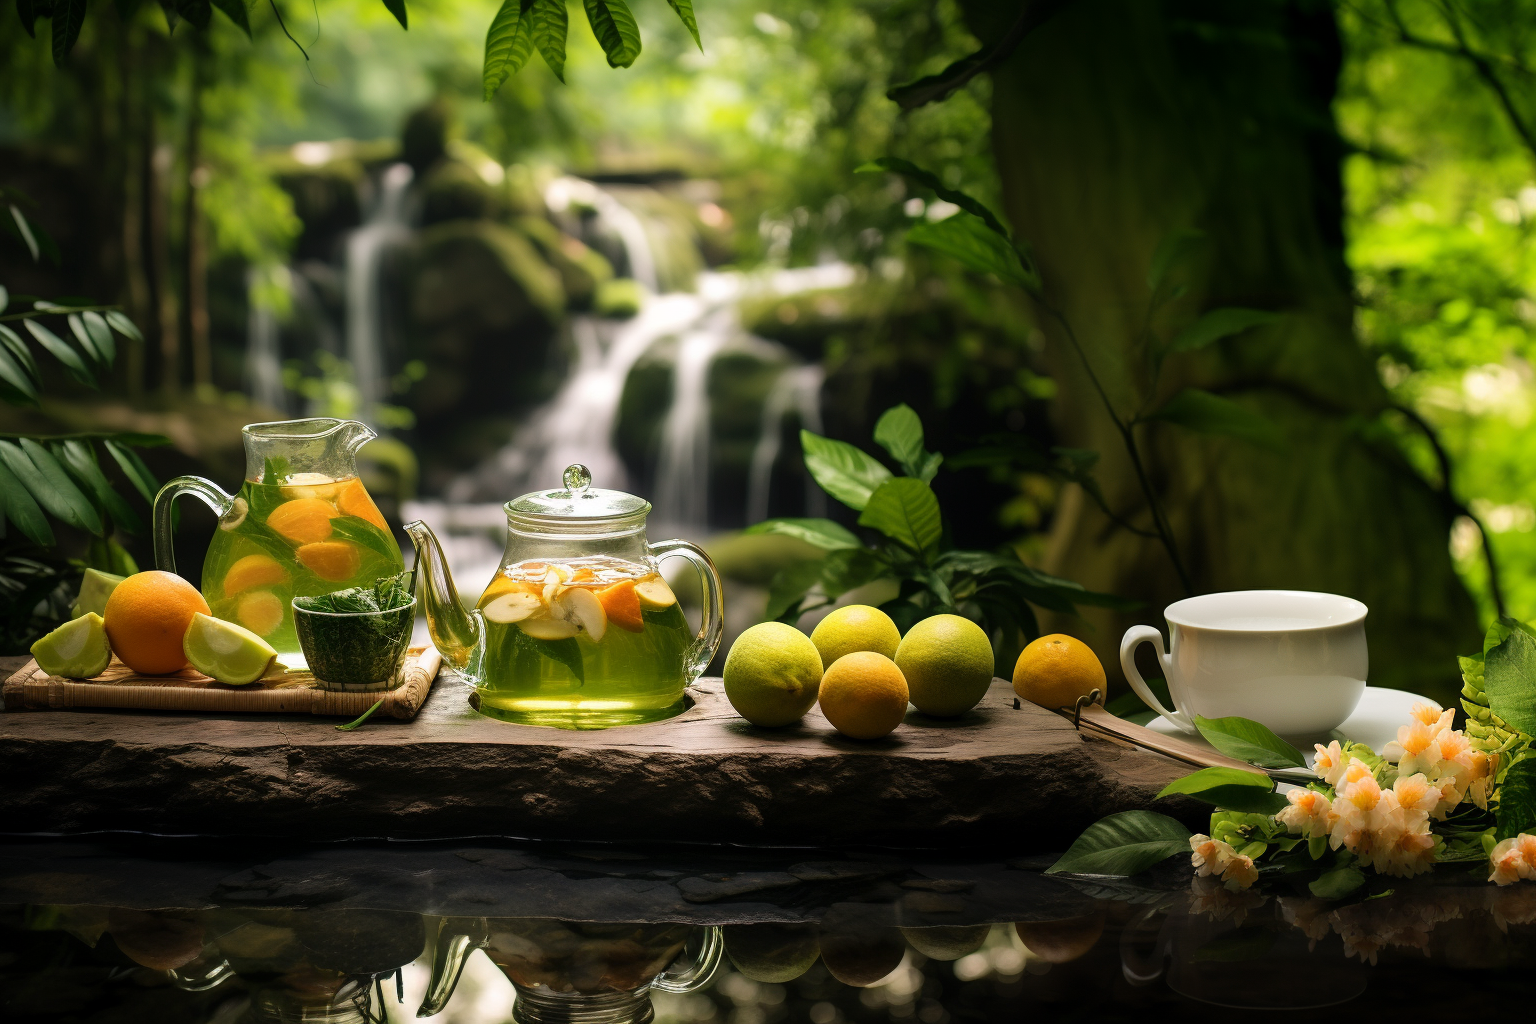 A pitcher and a teapot full of Rewind green tea peach zen surrounded by limes and lemons arranged on a stone slab with a waterfall background.